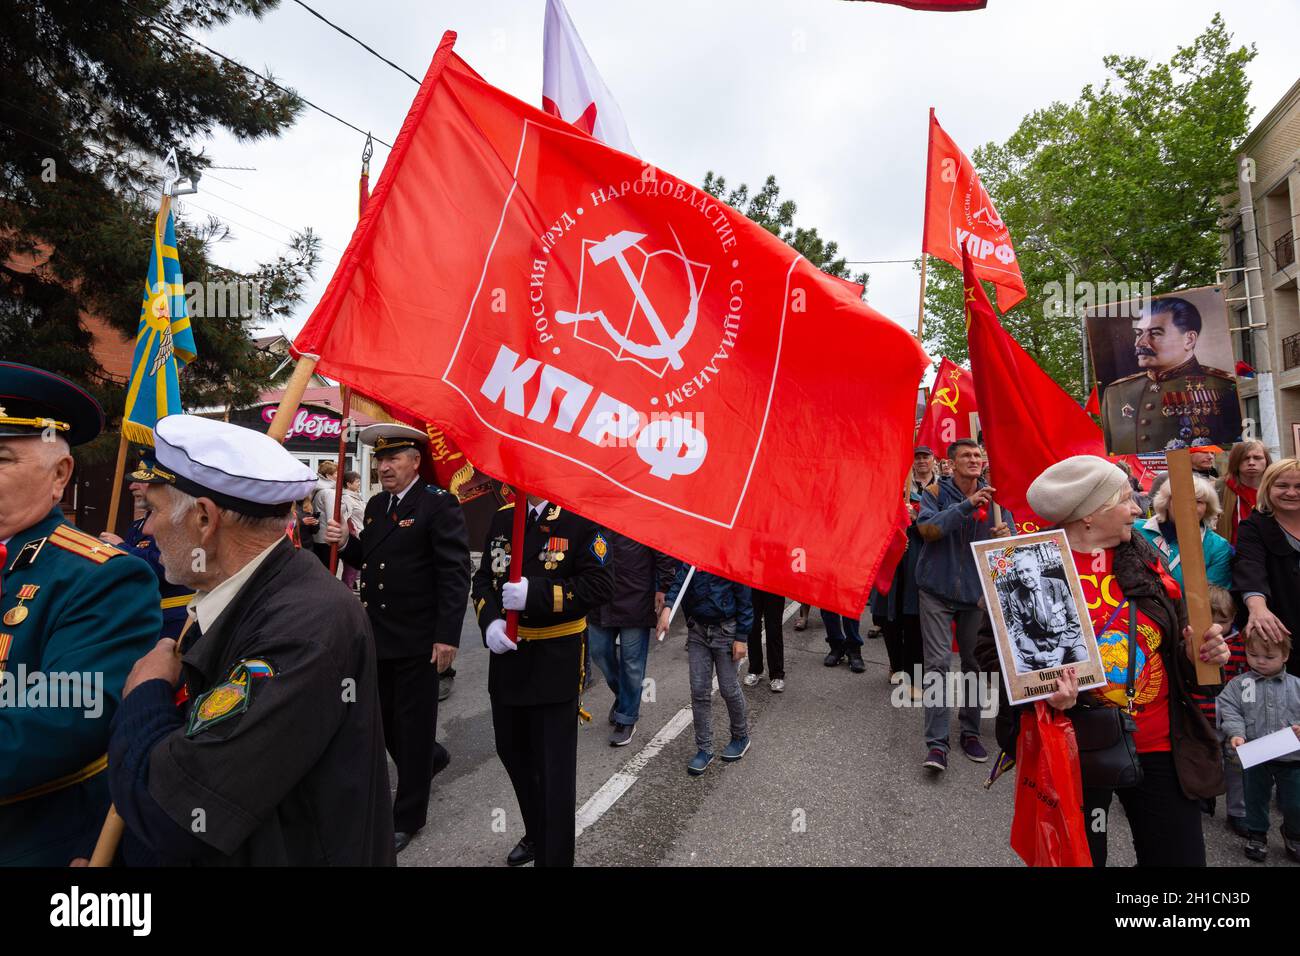 Anapa, Russia - May 9, 2019: The red flag of the Communist Party of the Russian Federation among the participants in the victory parade in Anapa Stock Photo